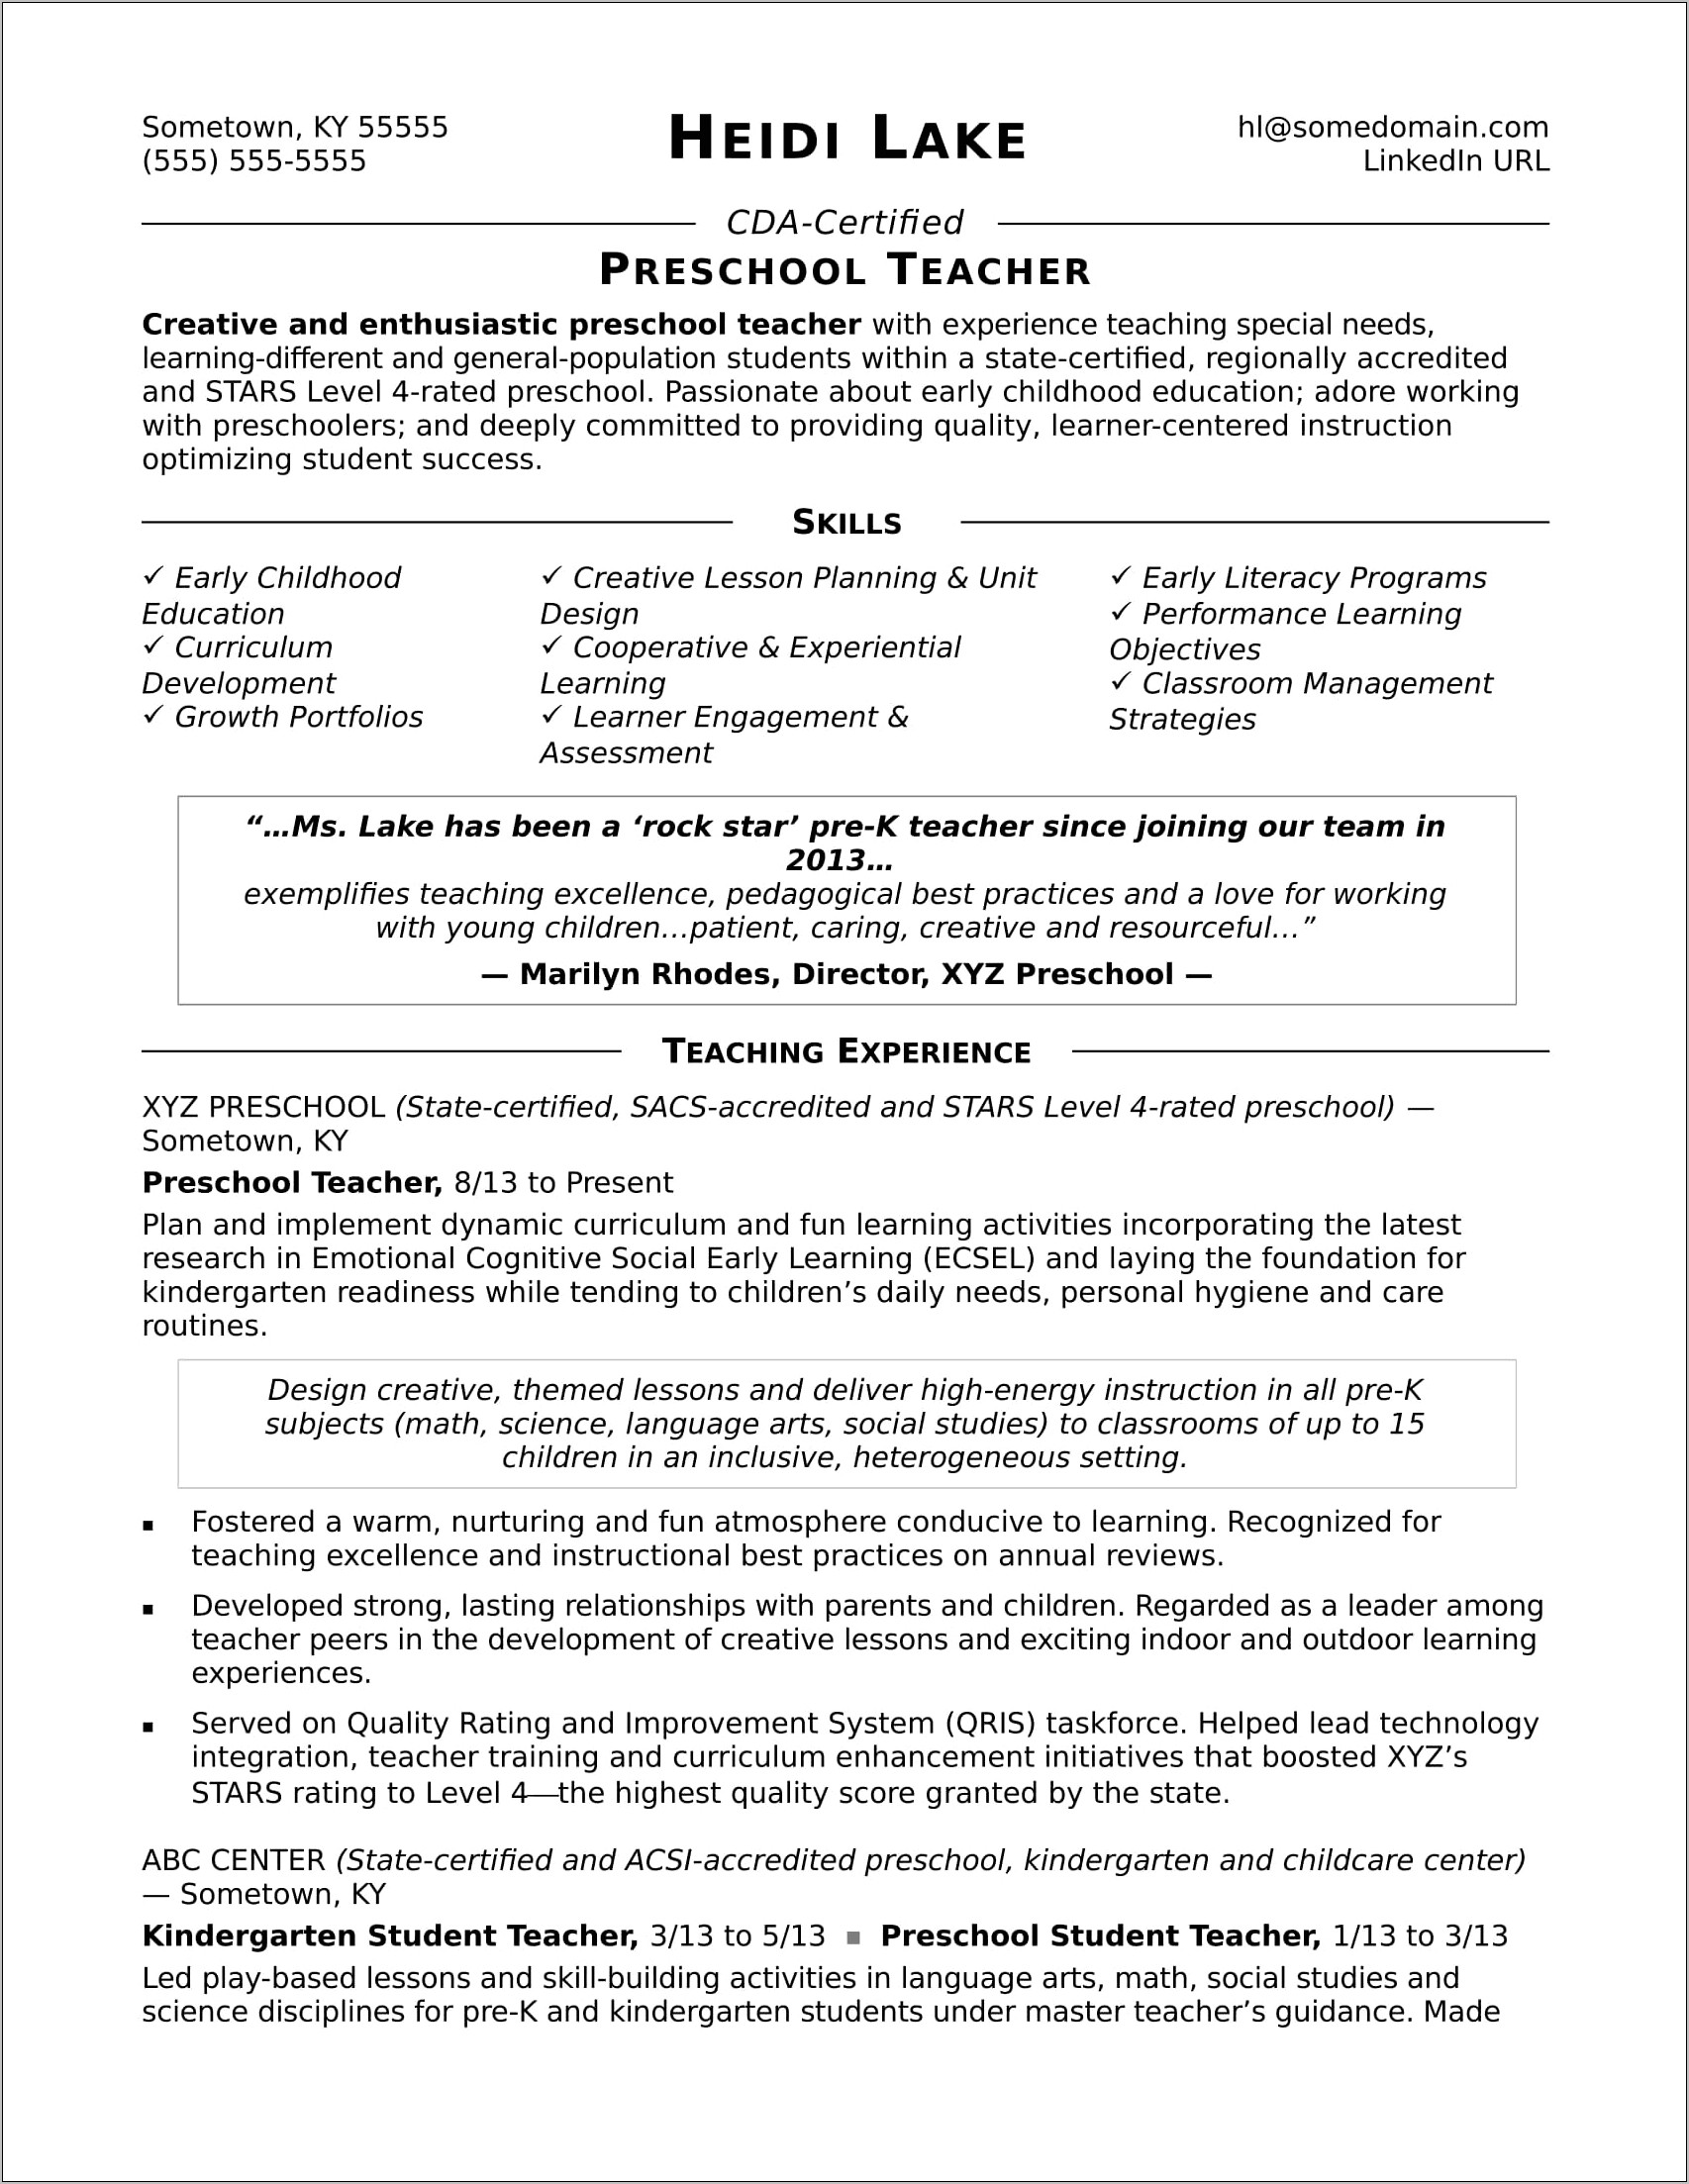 Personal Resume For Performing Arts School